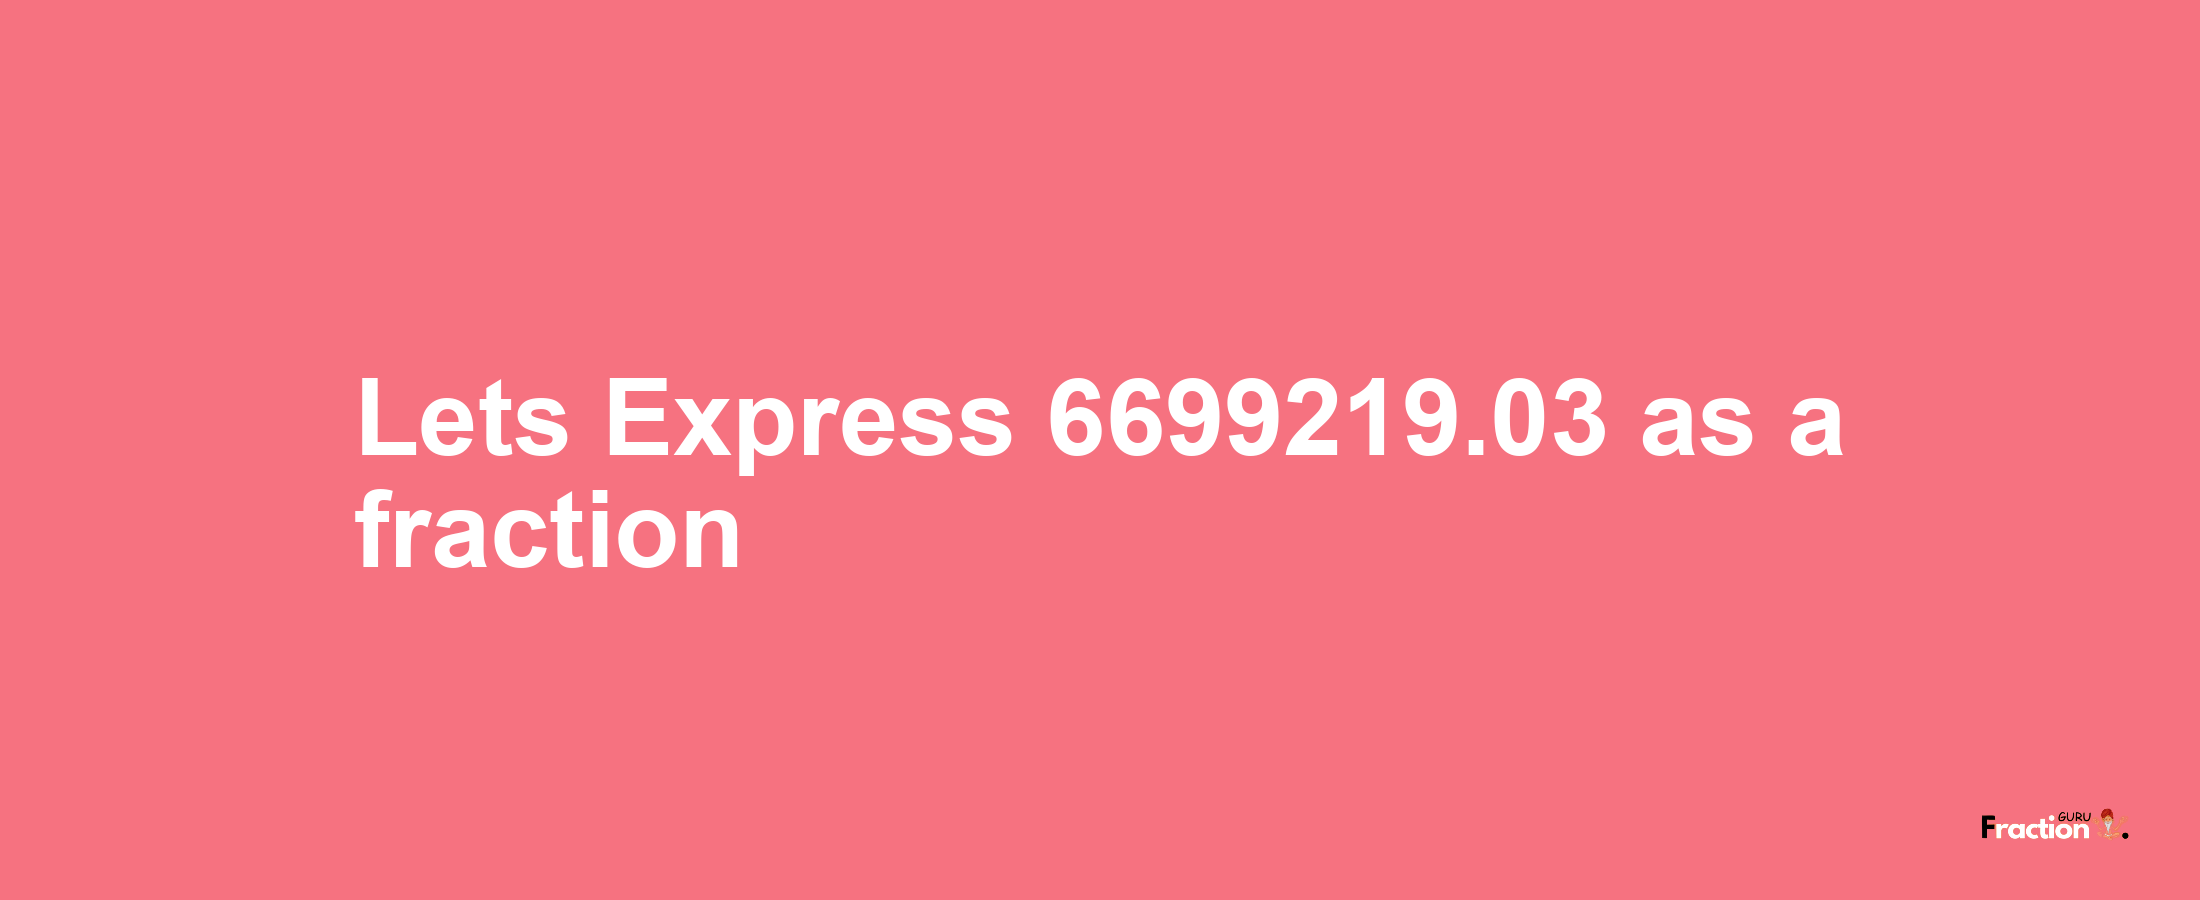 Lets Express 6699219.03 as afraction